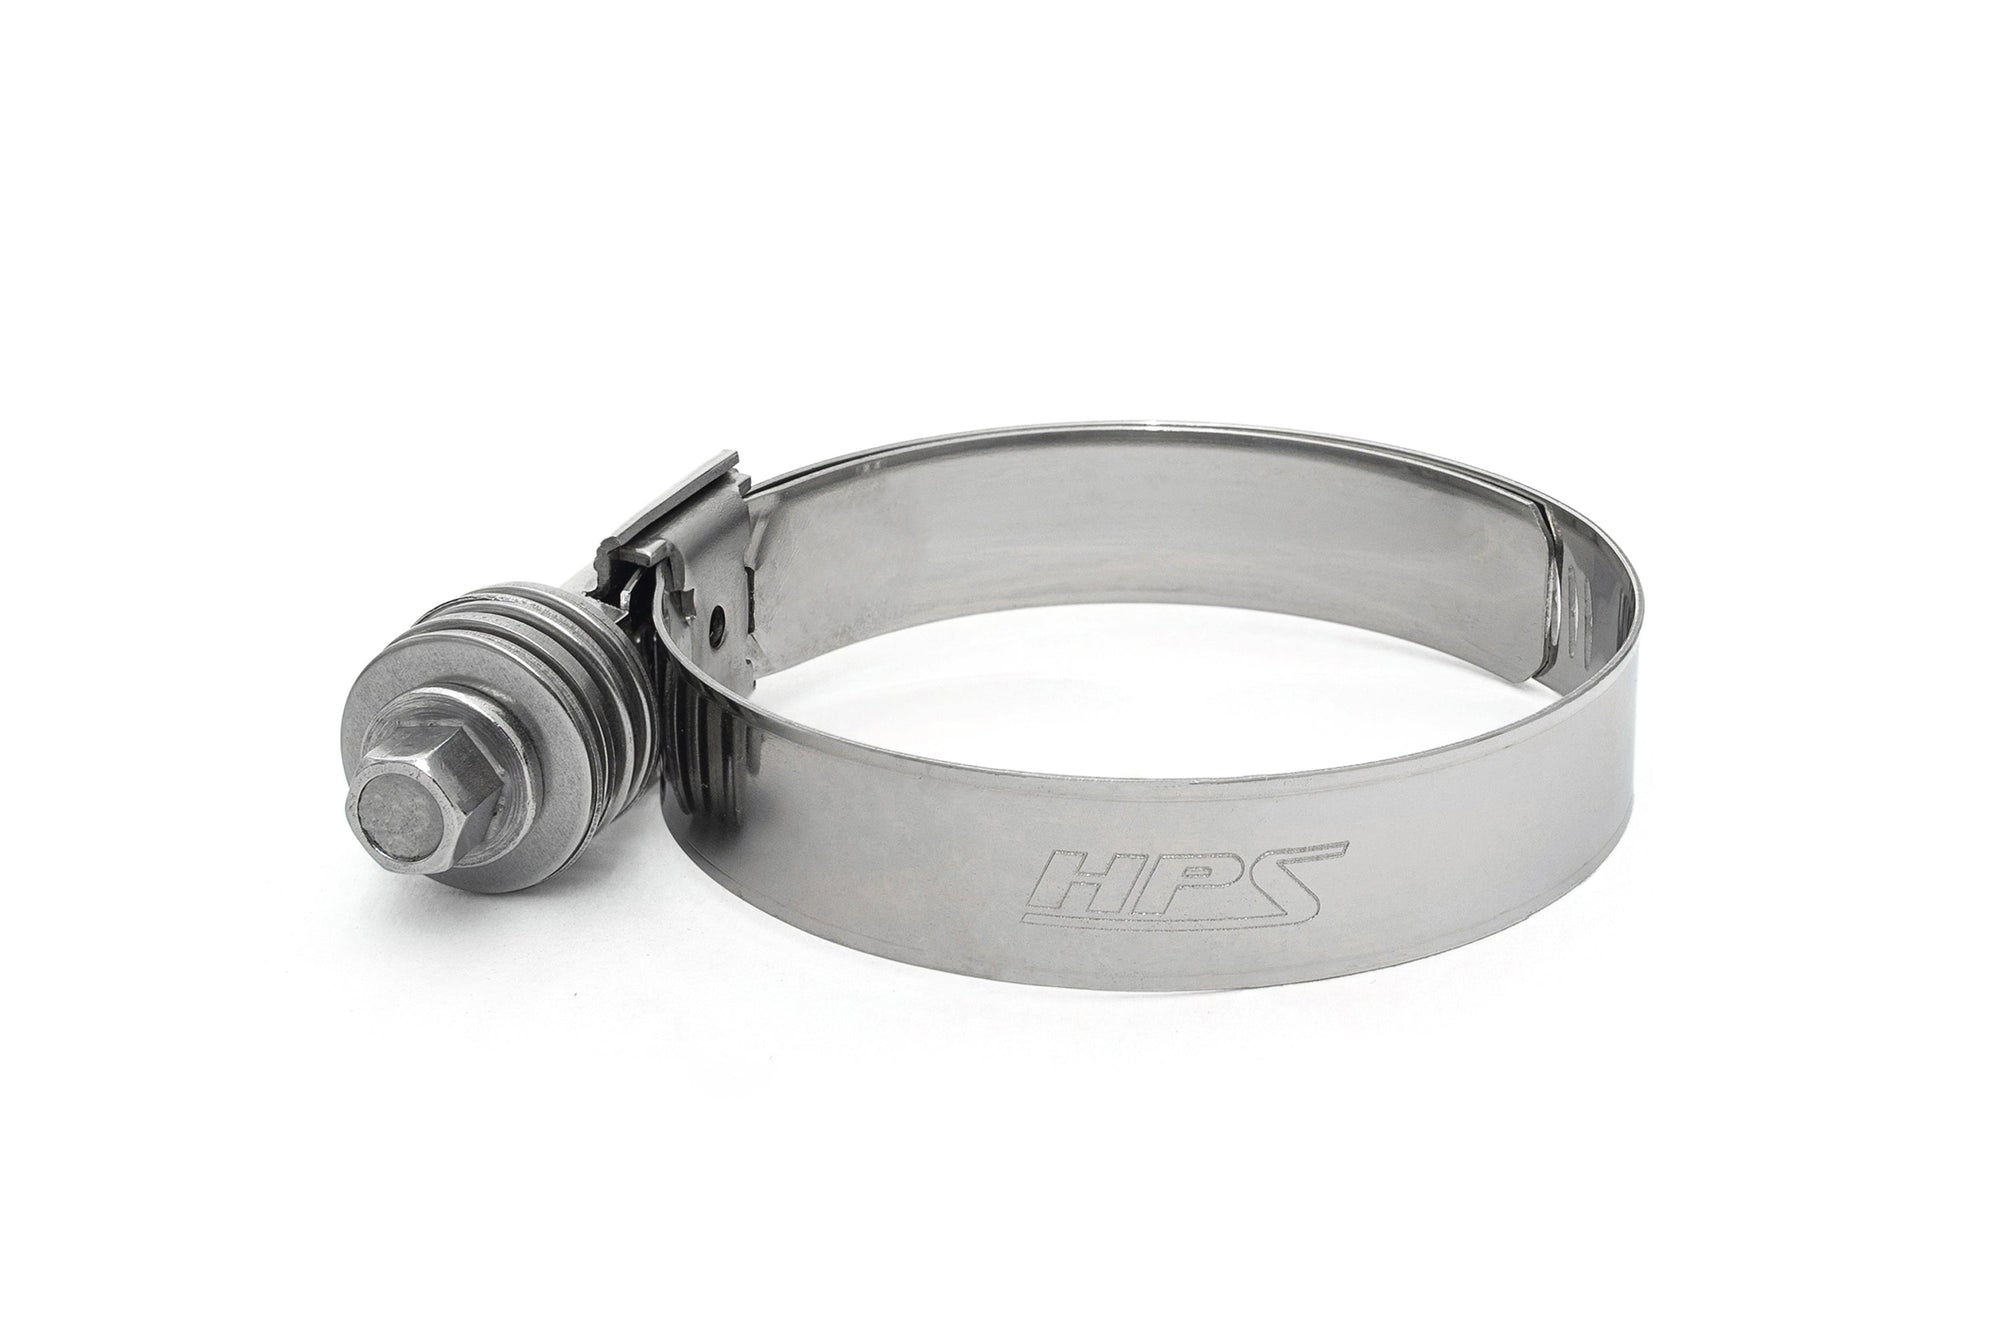 HPS Stainless Steel Heavy Duty Constant Tension Hose Clamp CTHD-512 fits 4-1/4", 4-5/16", 4-1/2" inch silicone hose charge air intake turbo cac intercooler pipe